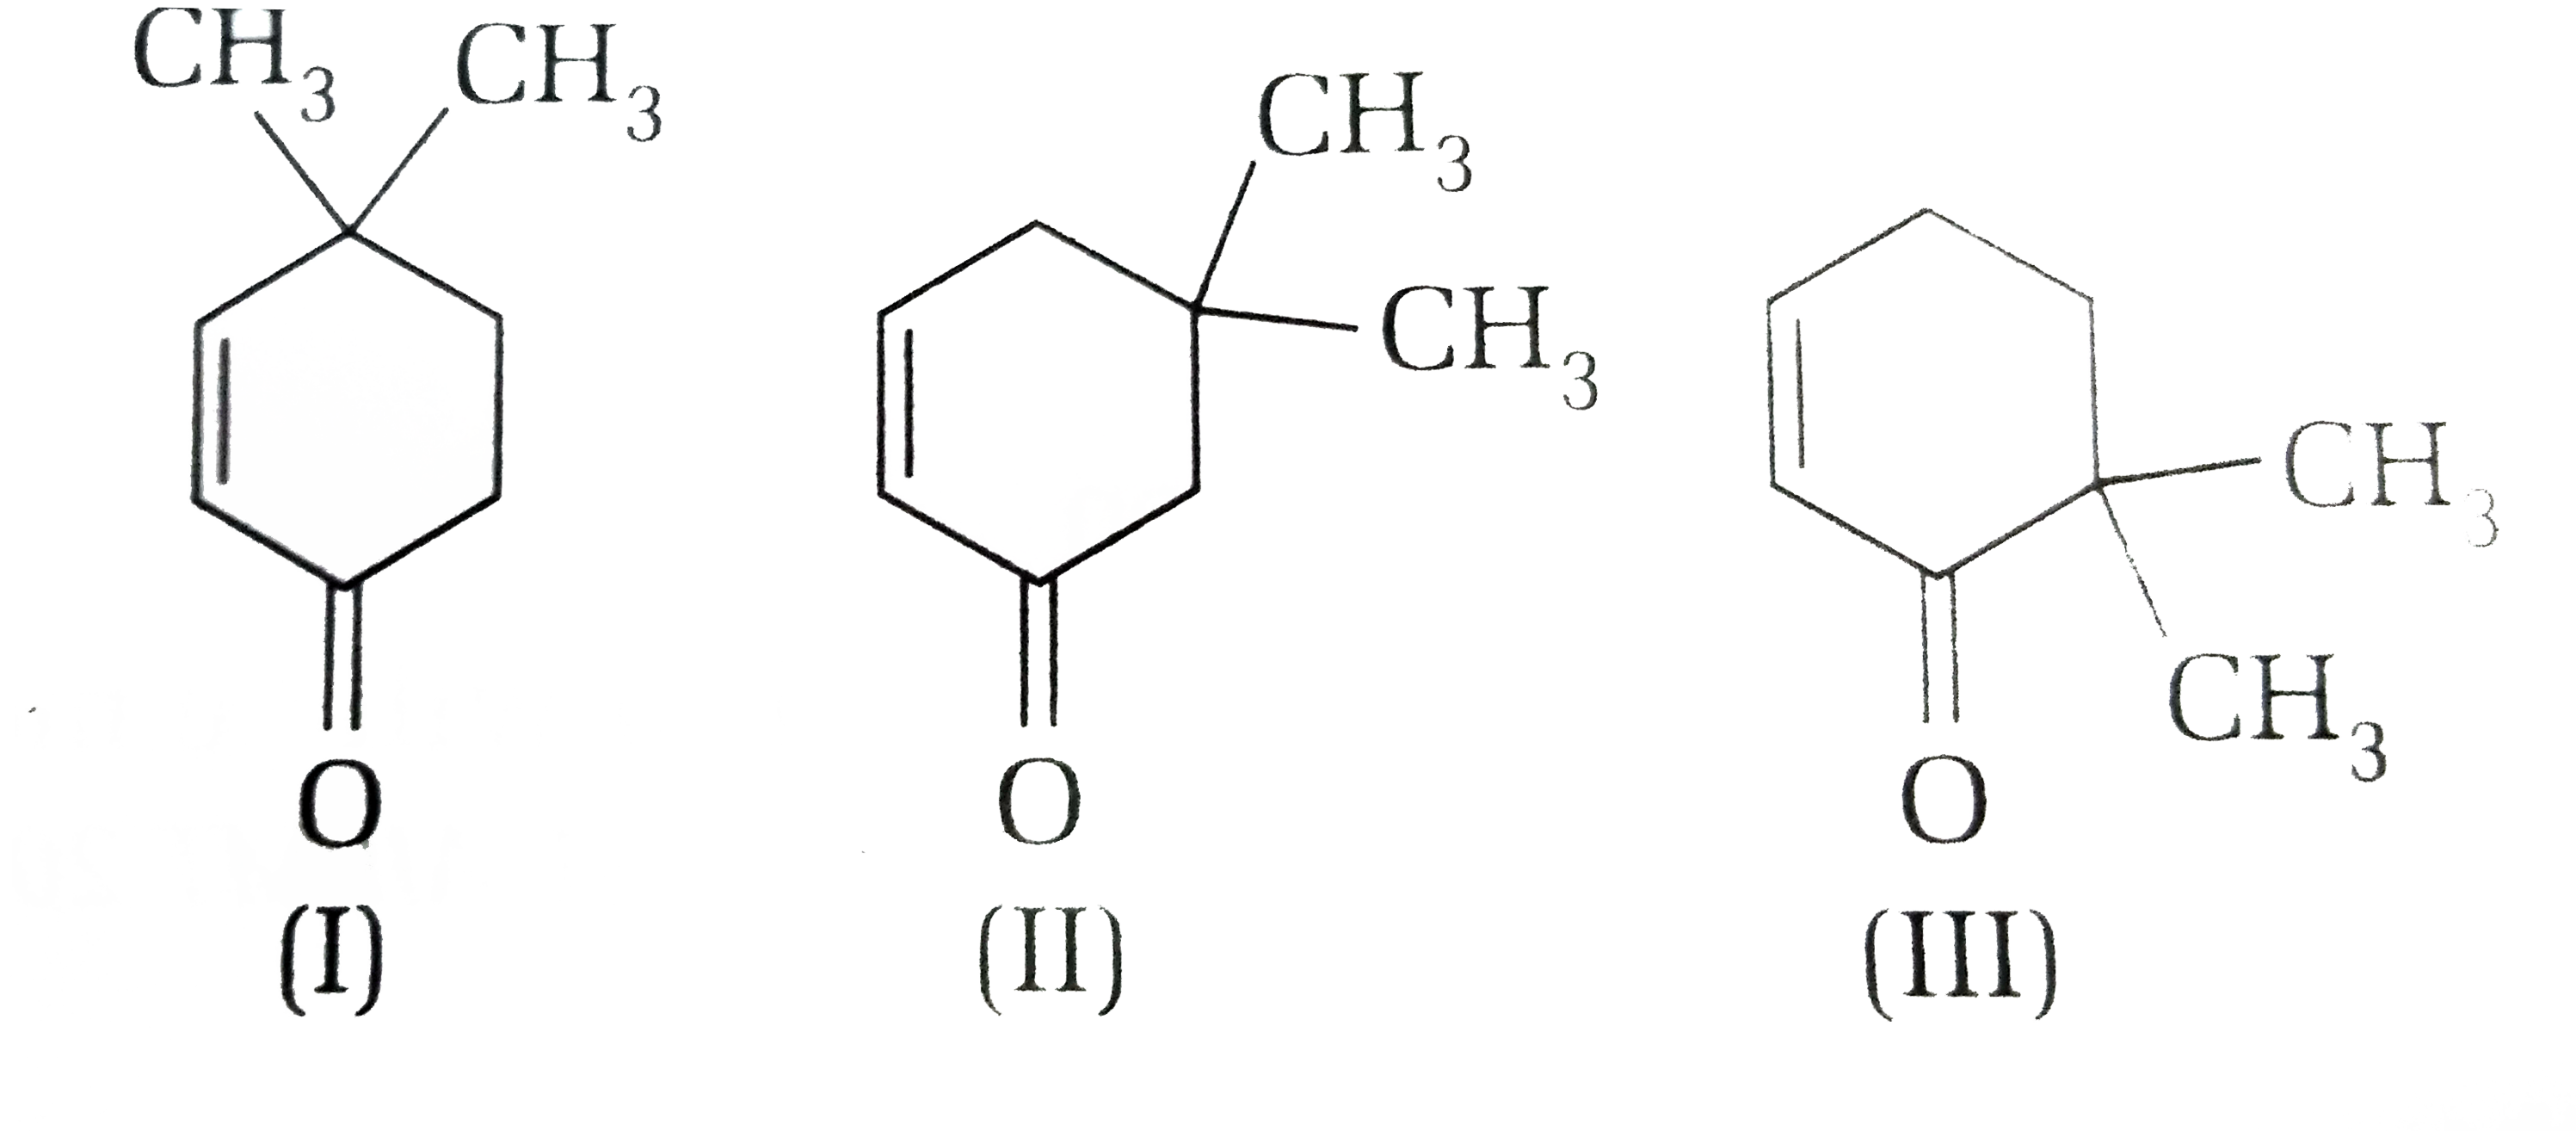 Given,      Which of the given compounds can exhibit tautomerism?